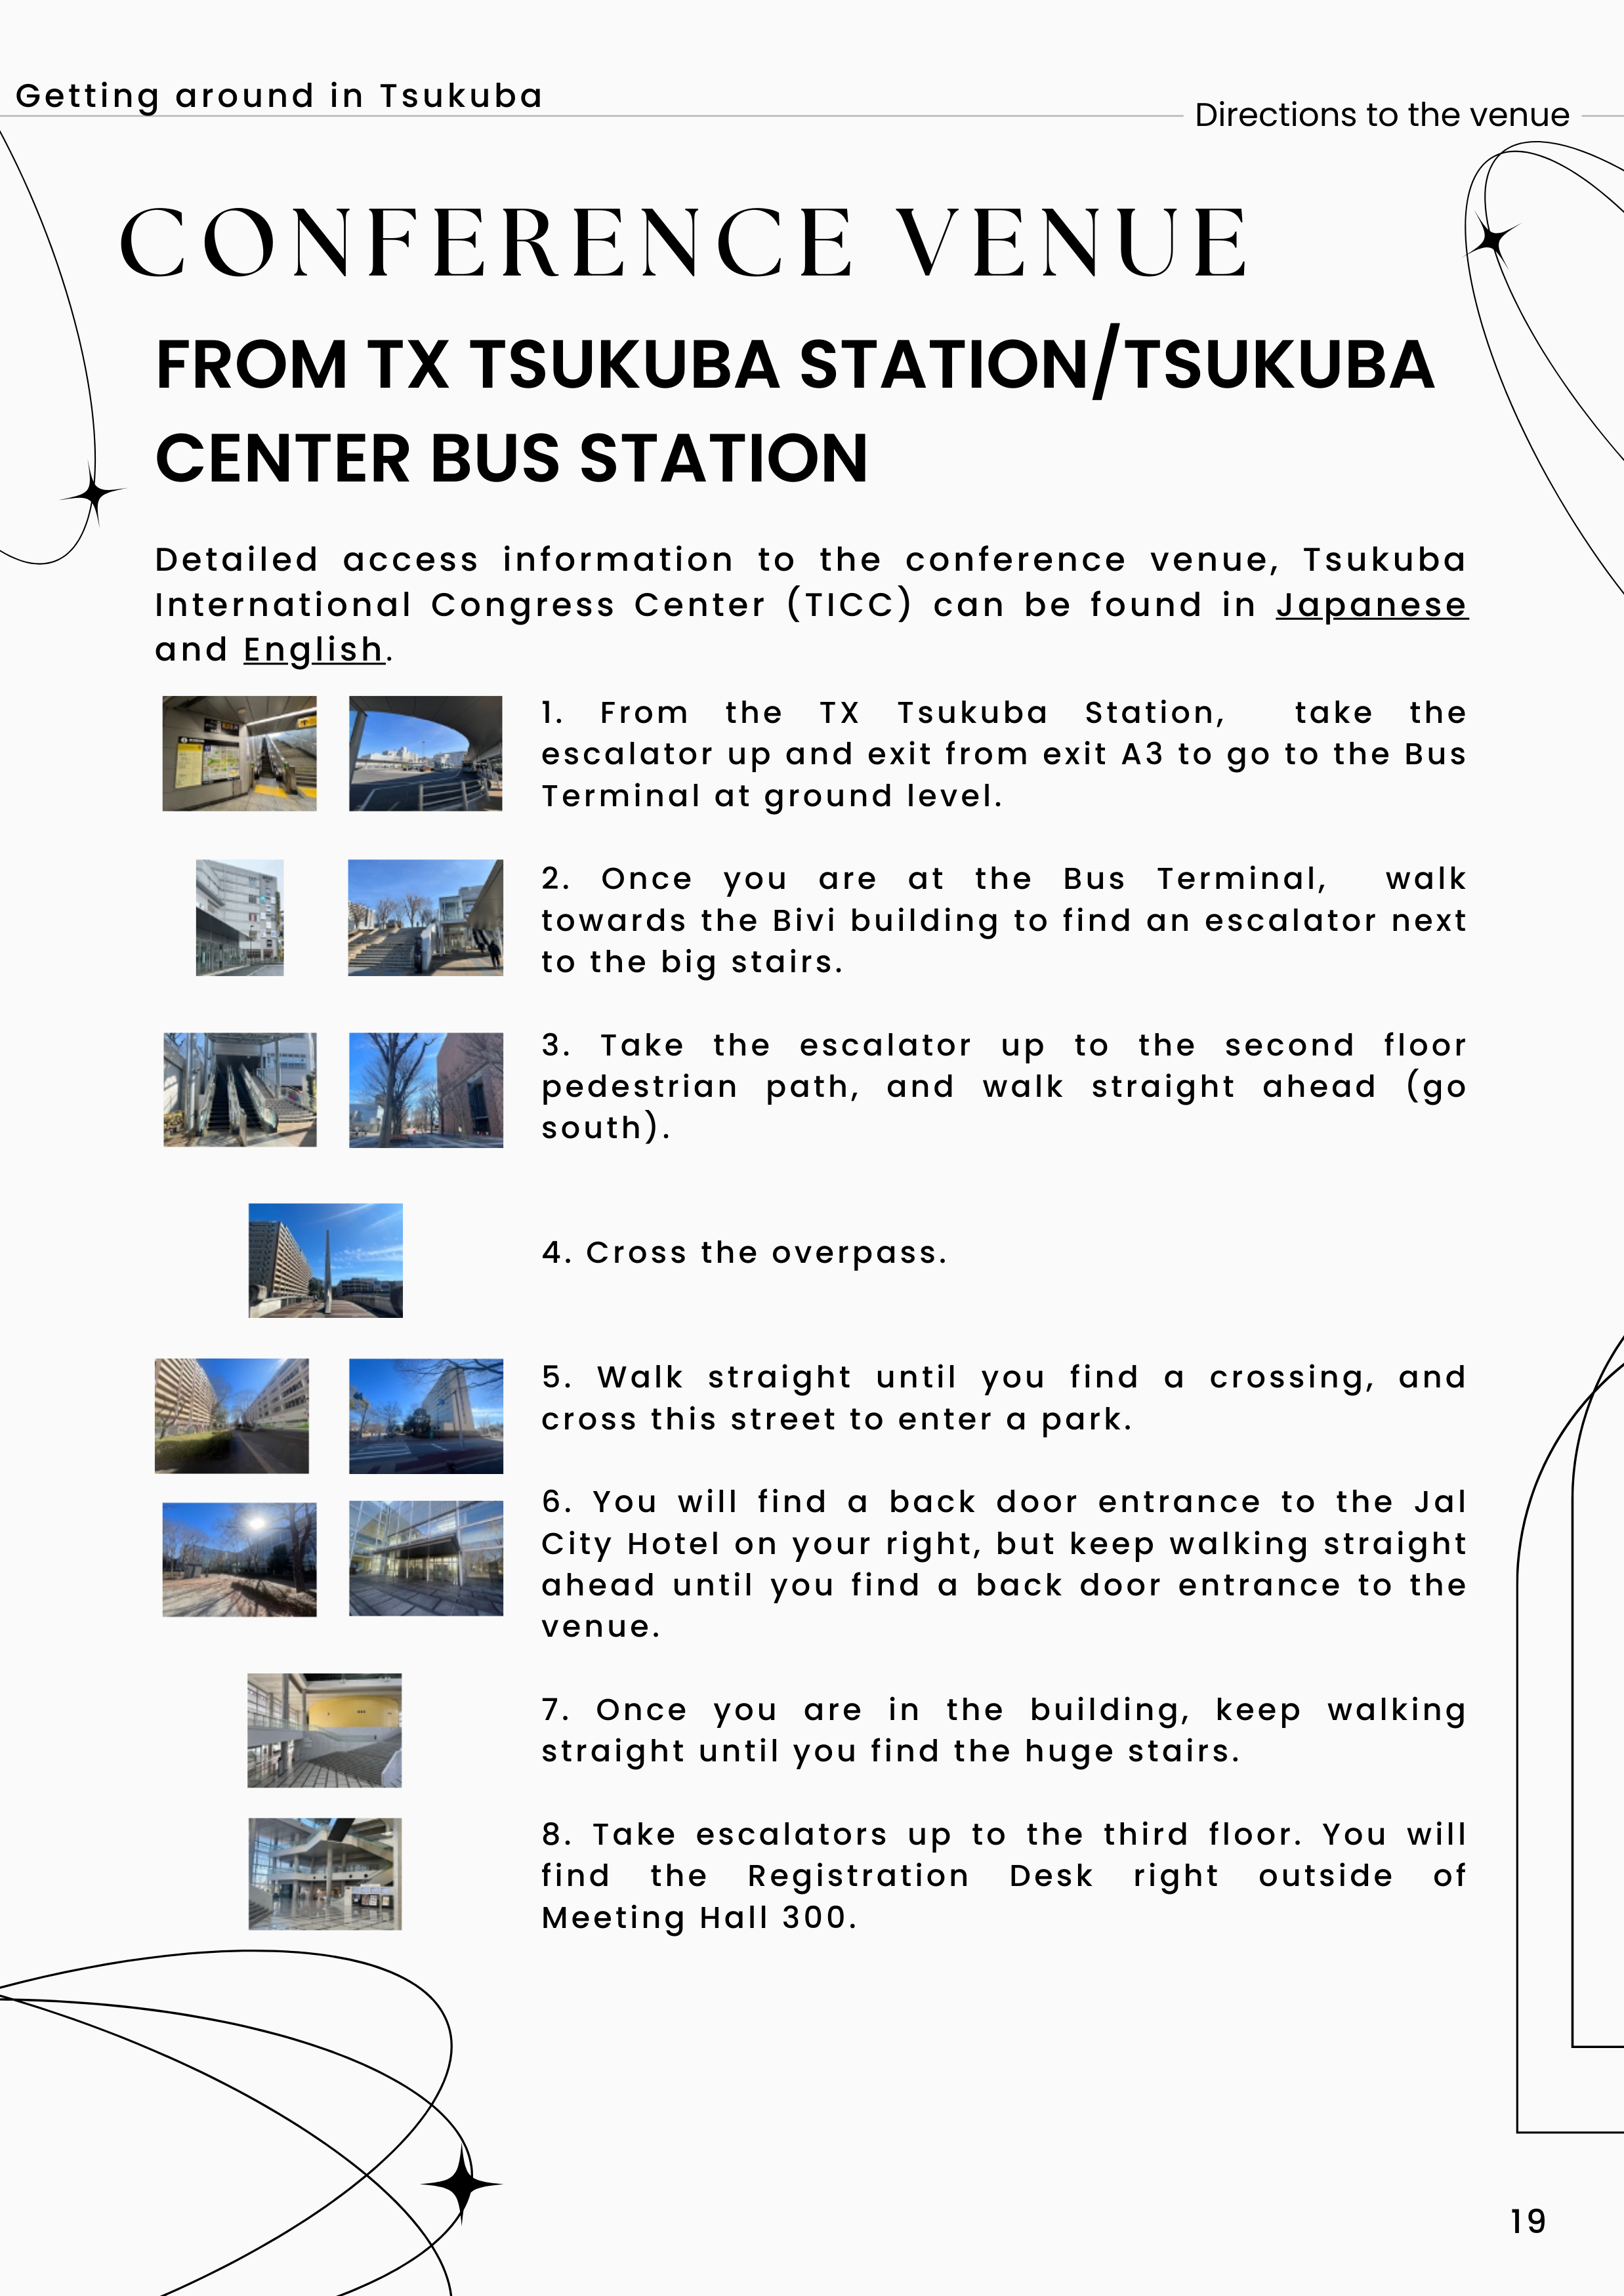 Tsukuba - directions to the venue.png